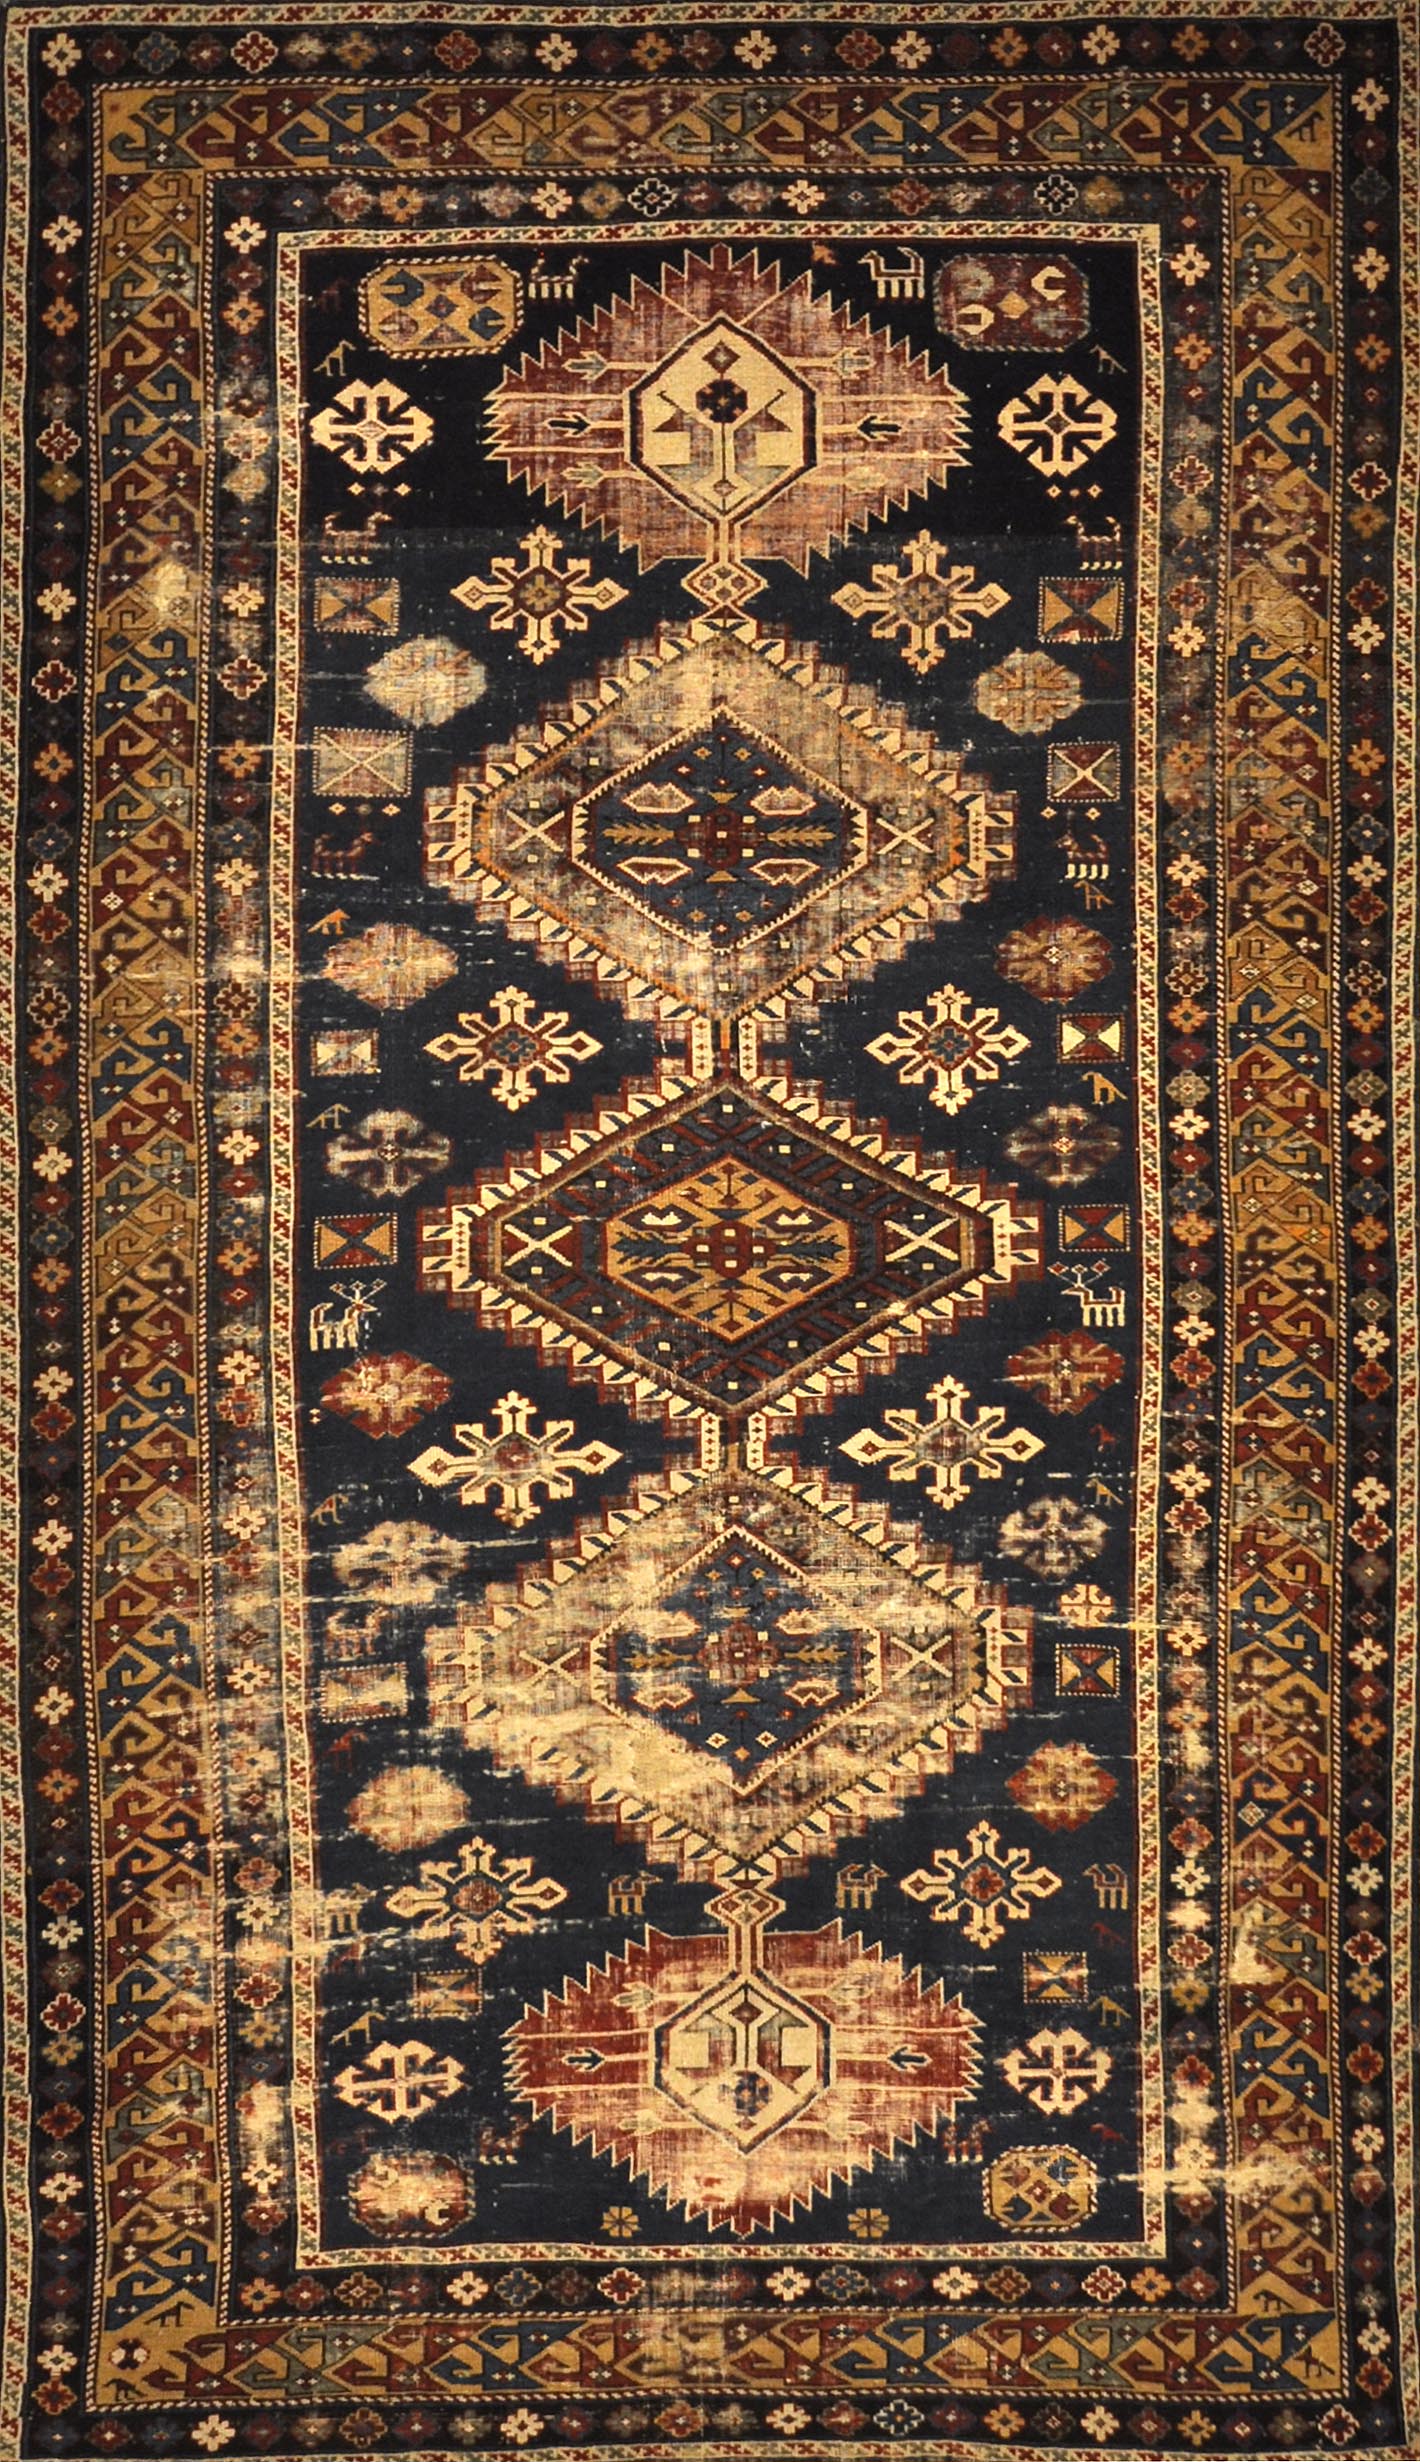 Very Old Antique Shirvan First Half of 19th Century. A piece of antique authentic genuine woven carpet art sold by the Santa Barbara Design Center.